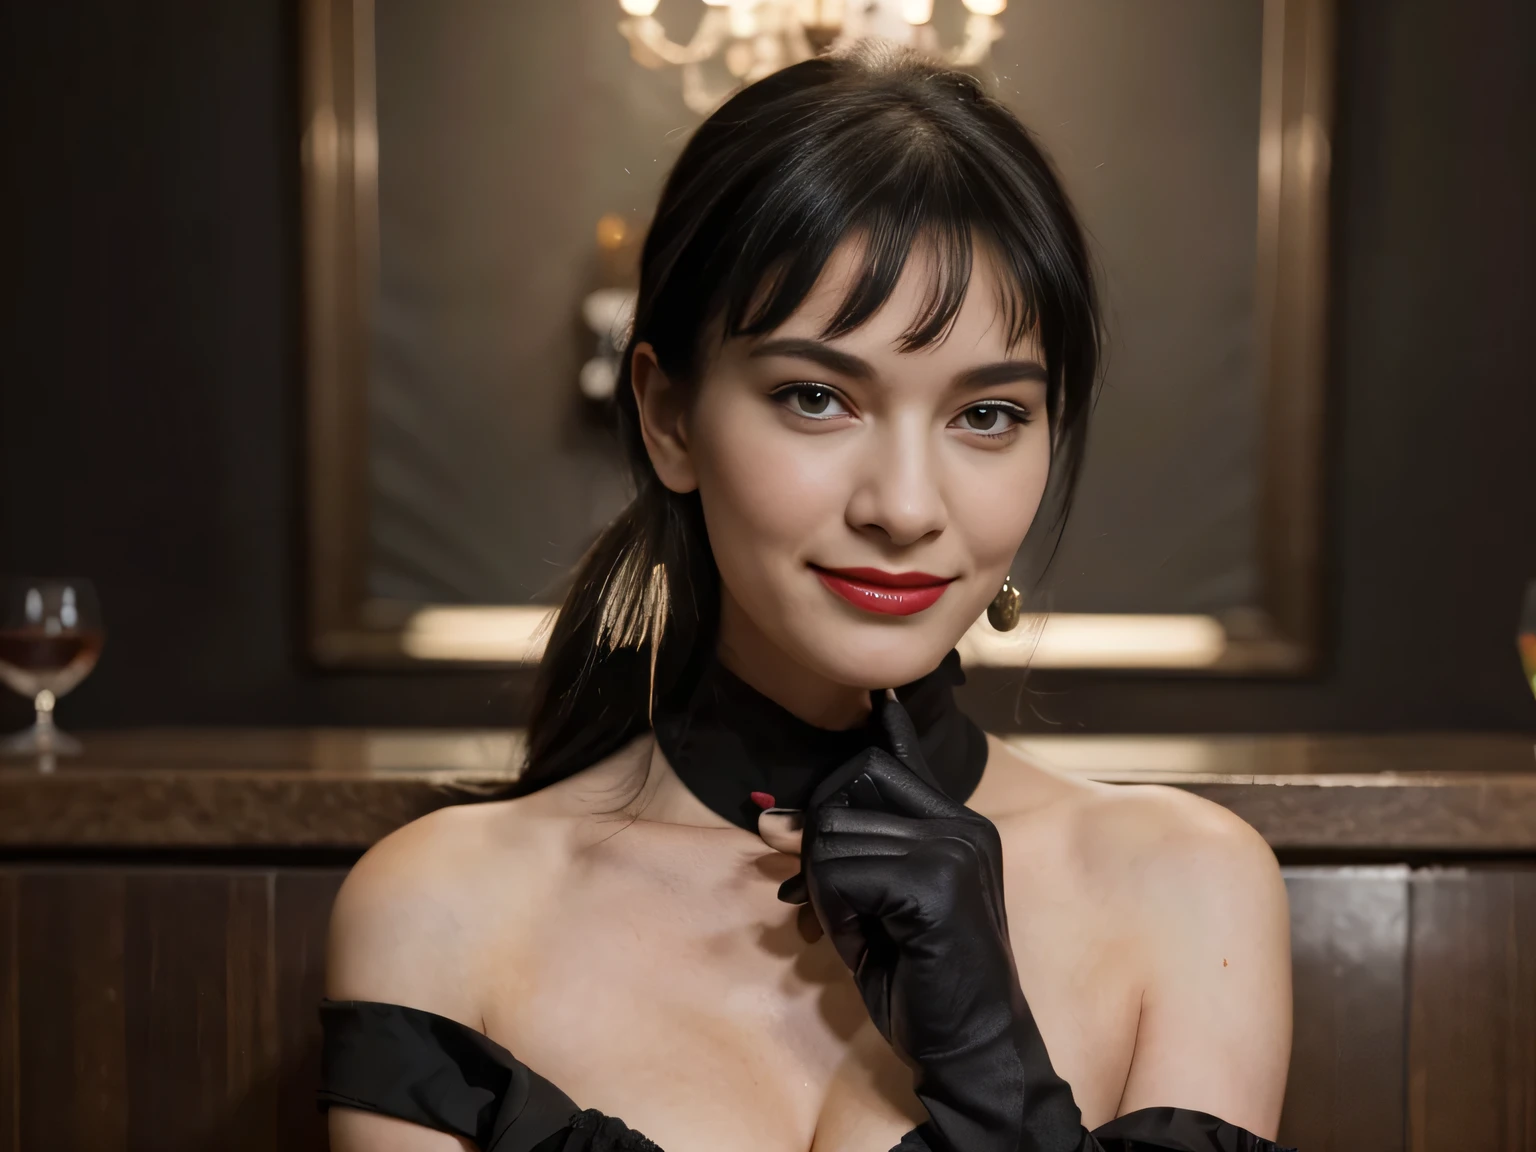 Magazine style photo of a smiling flirting with the camera Bettie page with black ponytail hair wearing a black 1900s off-the-shoulder ball dress and high black gloves inspired by Dior and Céline, red lipstick, direct lighting, at the grand hotel balloorm bar, holding from behind a gorgeous blonde woman,dark plain background, dynamic pose, beautiful body, 160 cm 50 kg, Soho, shot on Kodak Colorplus 200, film photography, f1.8 50mm lens